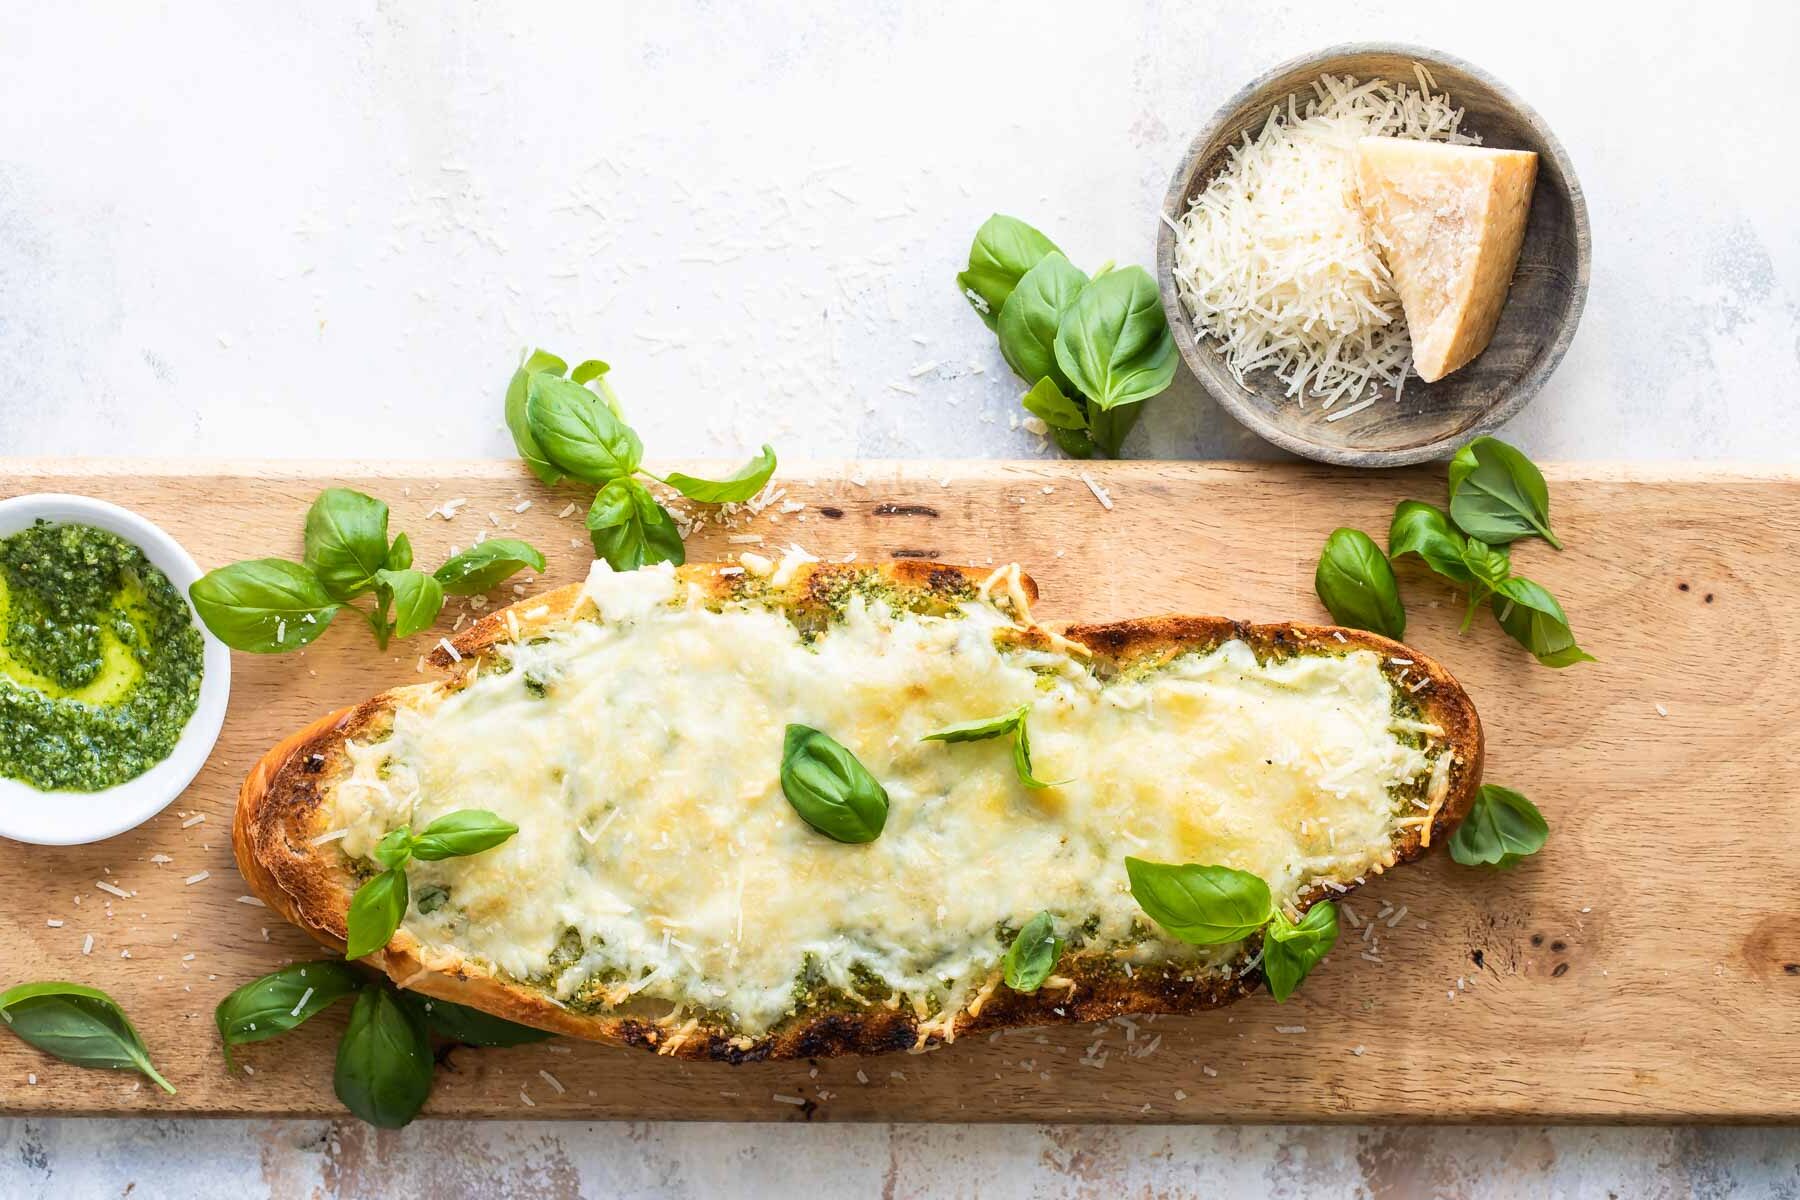 Slices of pesto cheese bread surrounded by basil leaves on a wooden cutting board.